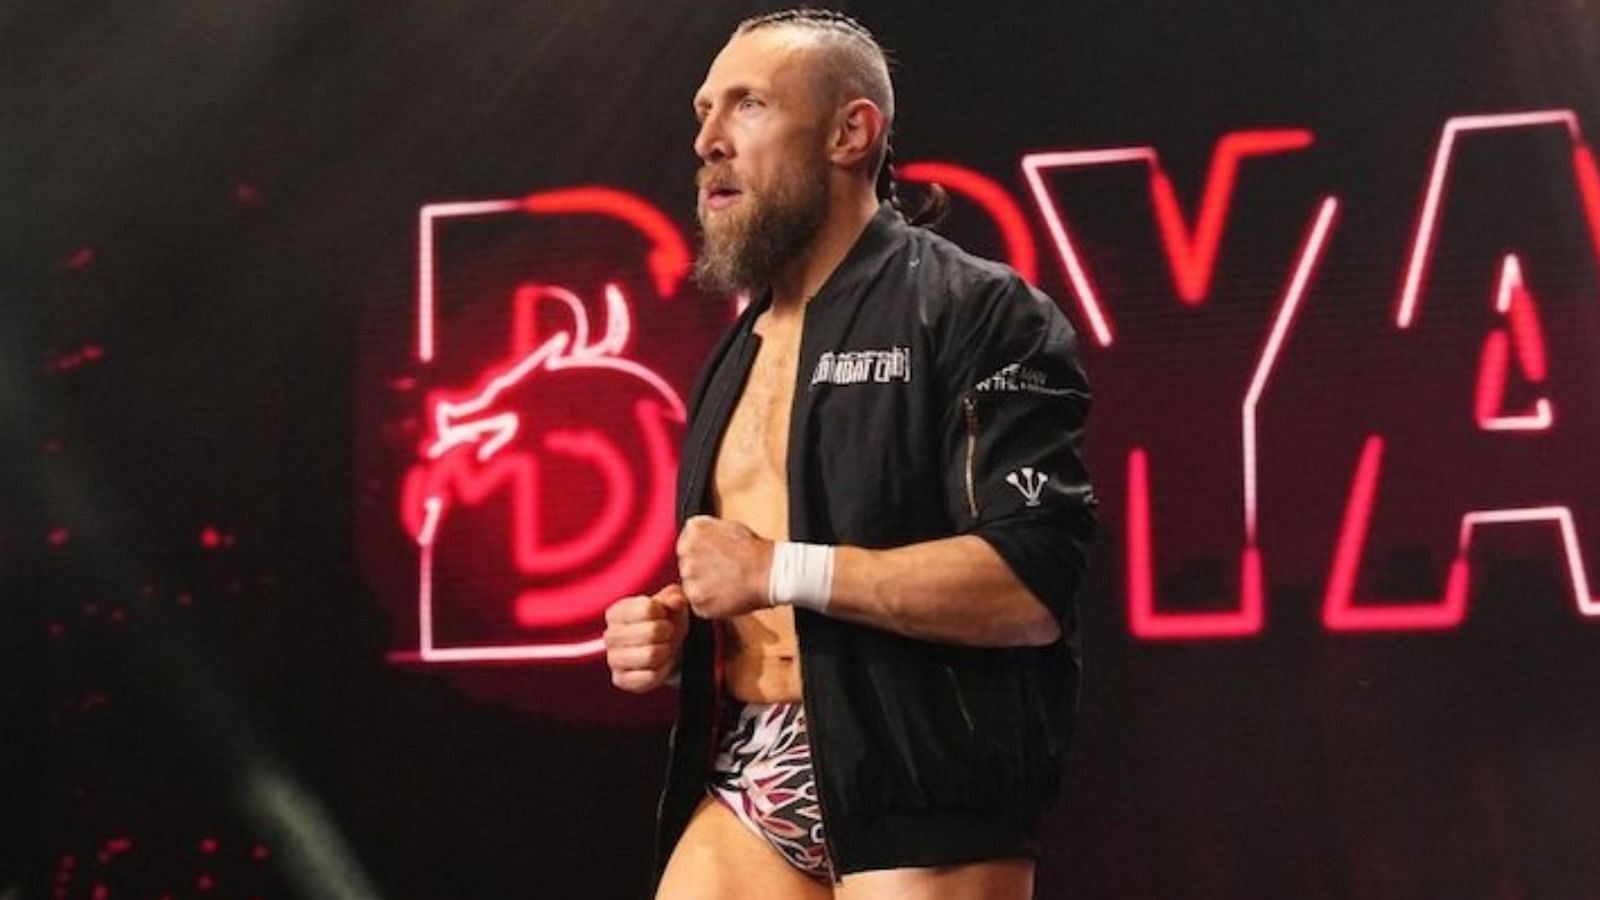 Bryan Danielson pictured going towards the ring